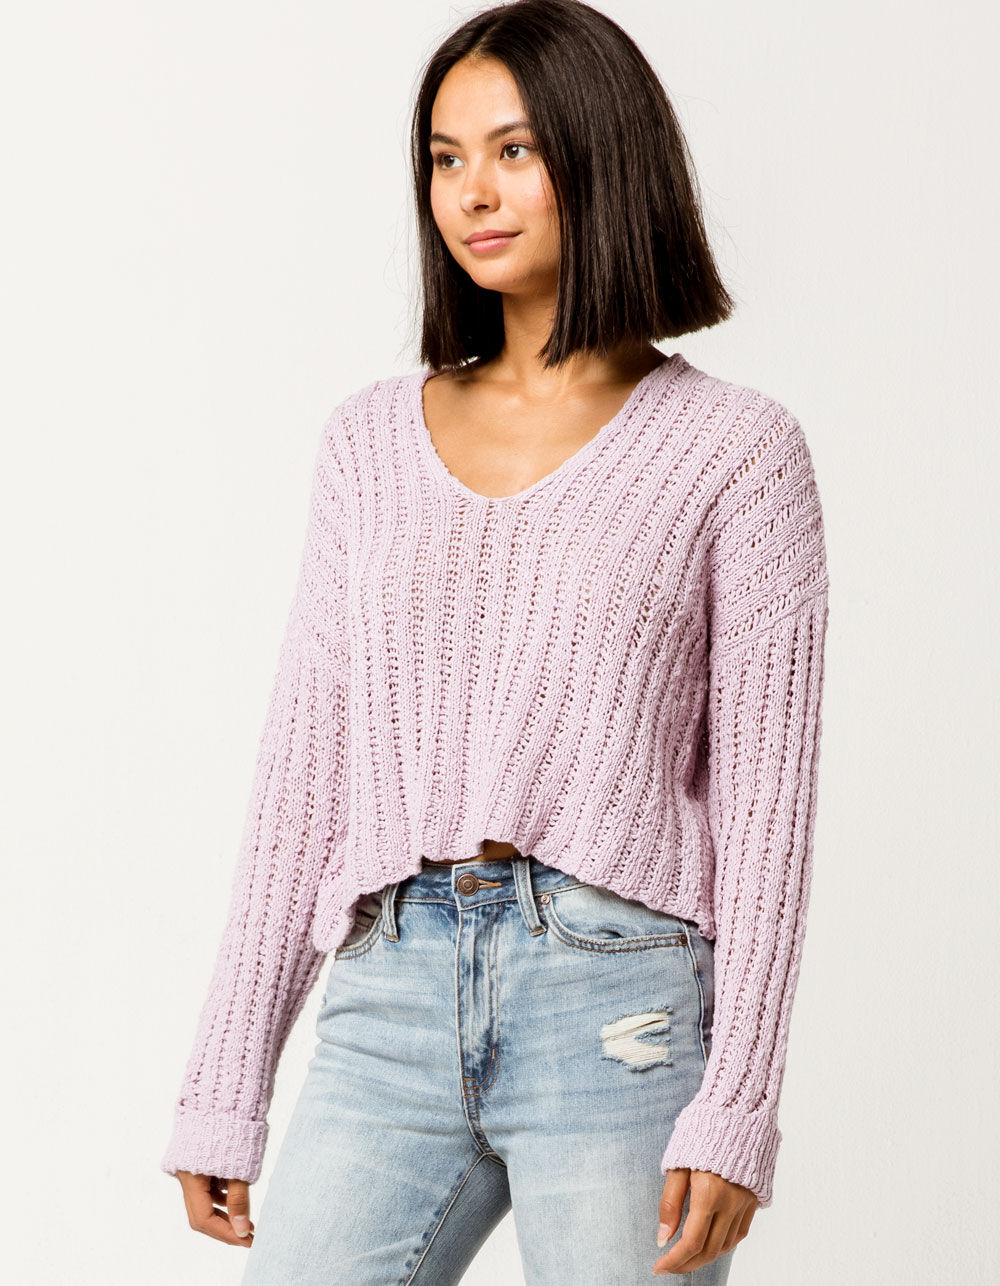 SKY AND SPARROW Open Weave Lavender Womens Sweater - LAVENDER | Tillys